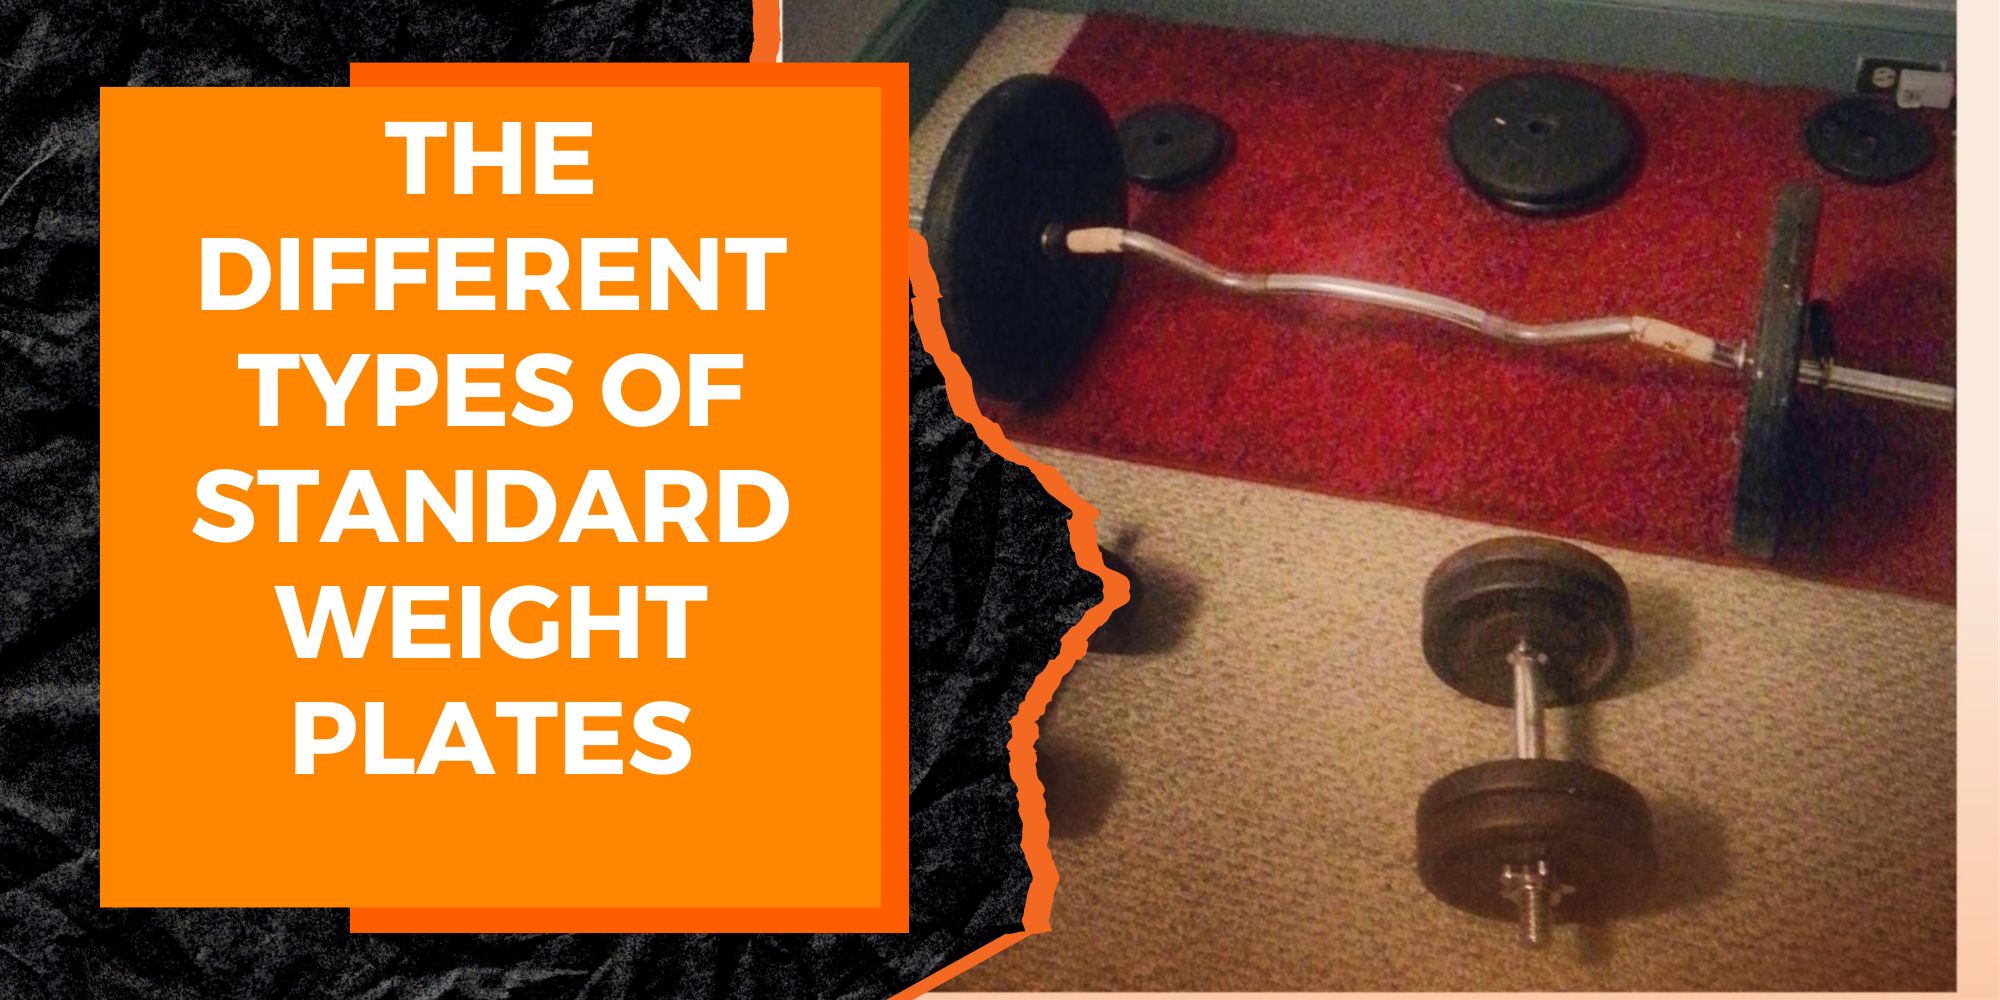 The Different Types of Standard Weight Plates